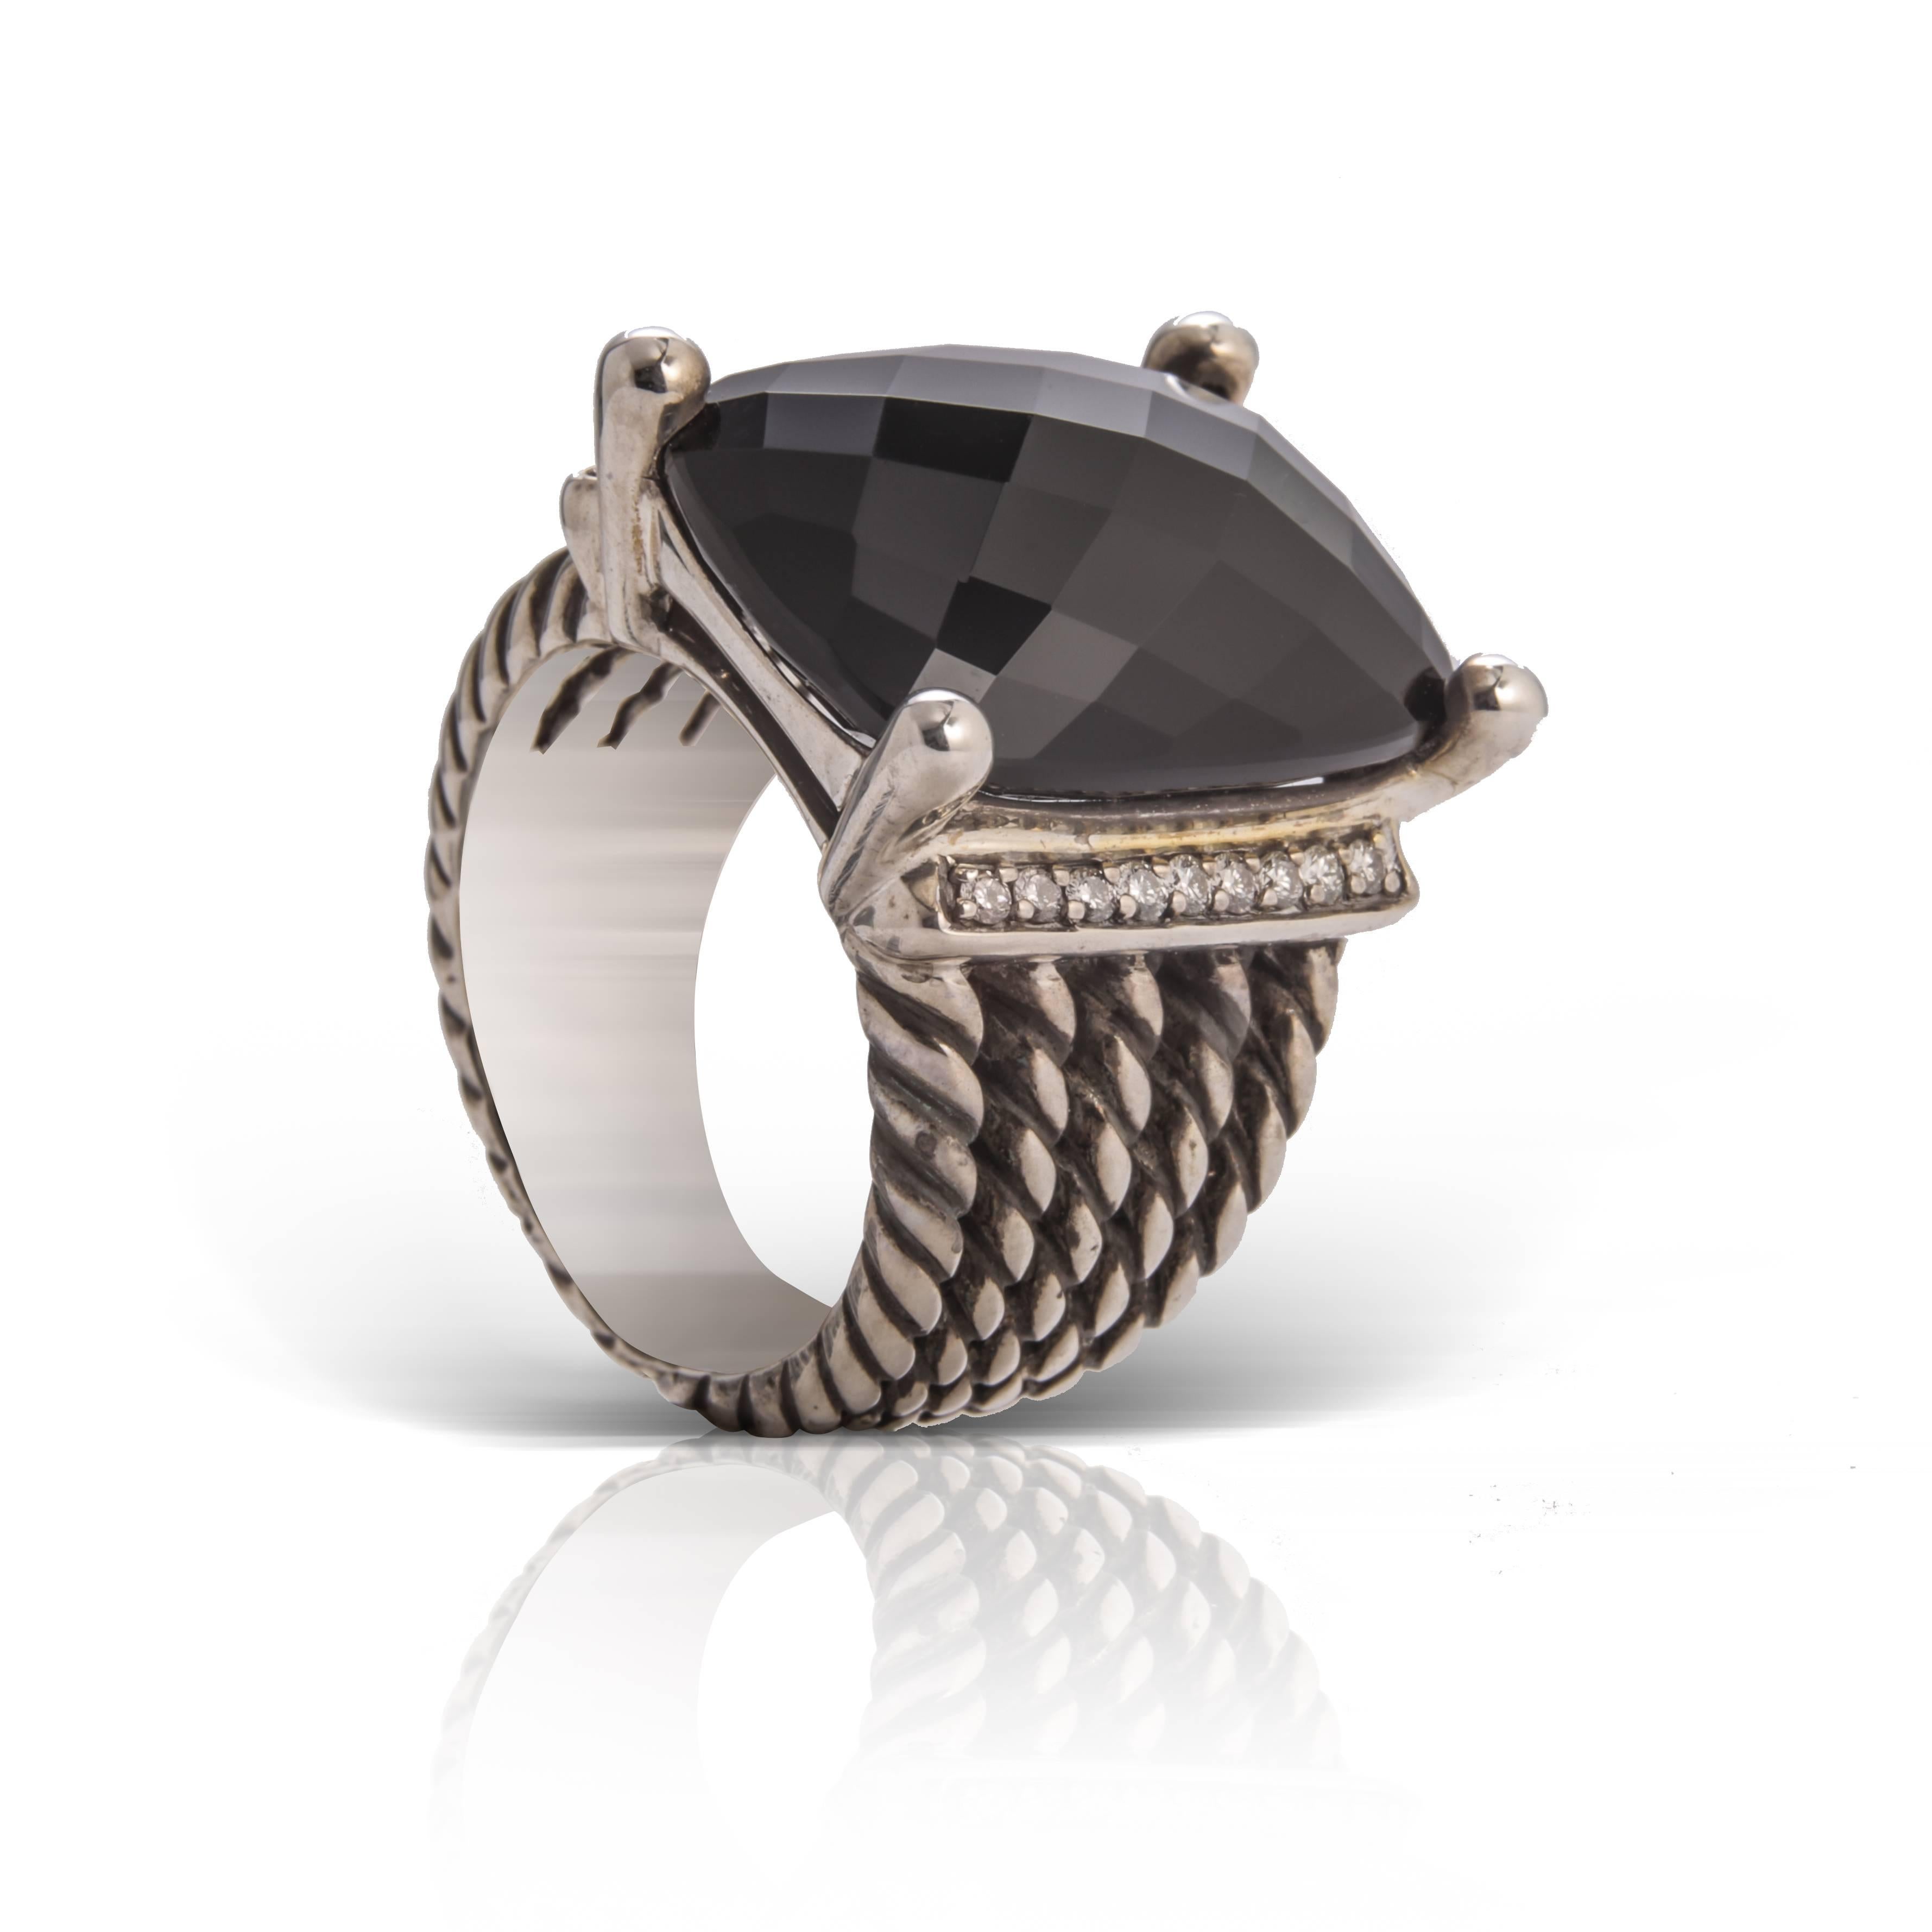 Previously loved sterling silver David Yurman Wheaton ring featuring black onyx with 0.23 carat of diamonds pave set at each side in white gold and split cable shank (size 7).

